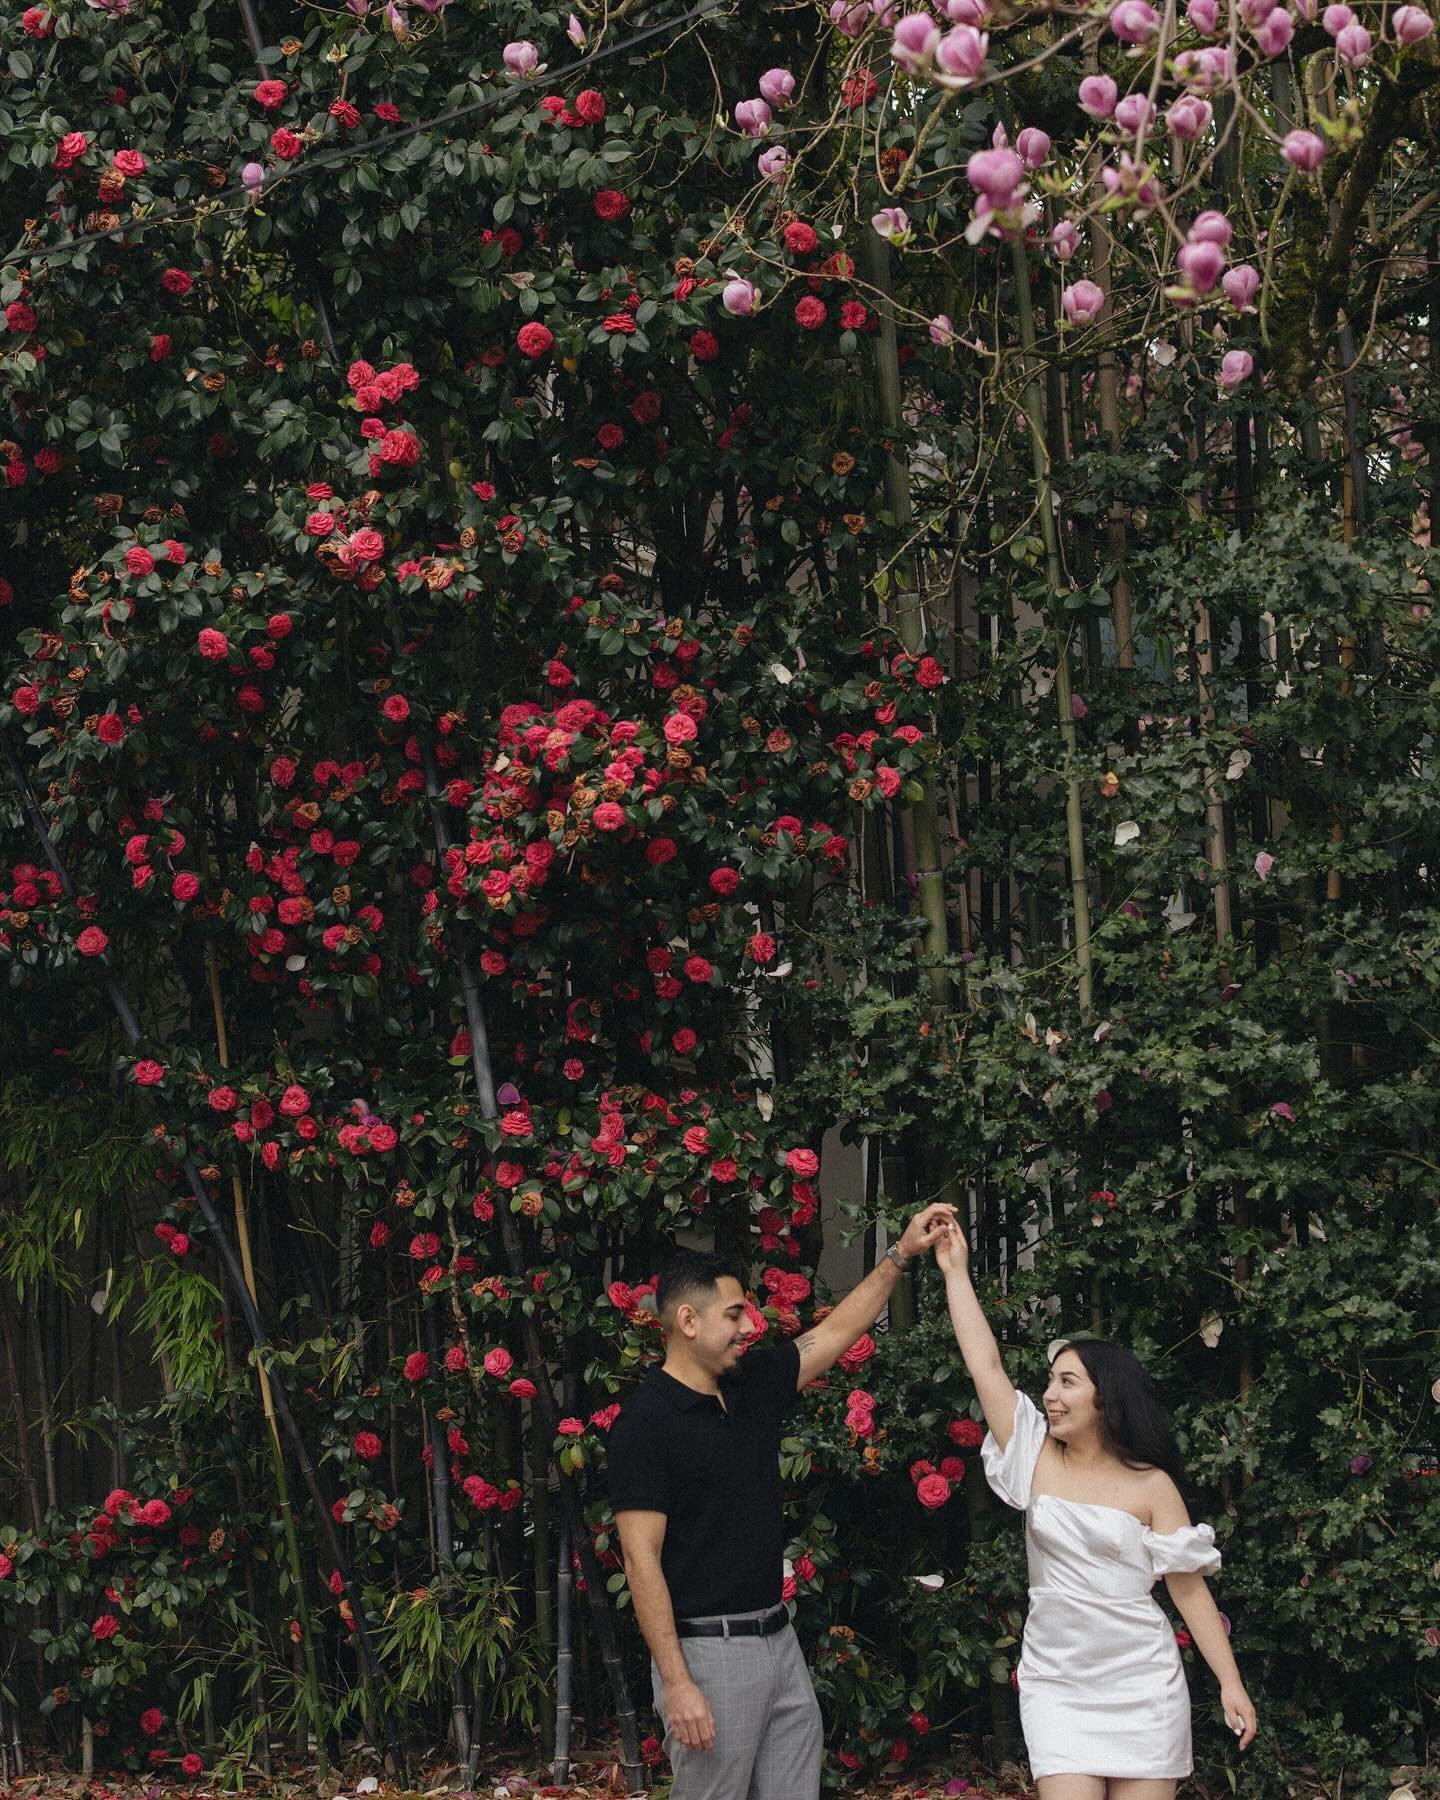 Isabell &amp; Ramon &mdash; A wonderful engagement session enjoy Portland on a spring day! Though the photos are not in order of our actual time hanging out.. we met up in the chaos of the Spring Blossoms! 🌸These two were troopers for braving the cr